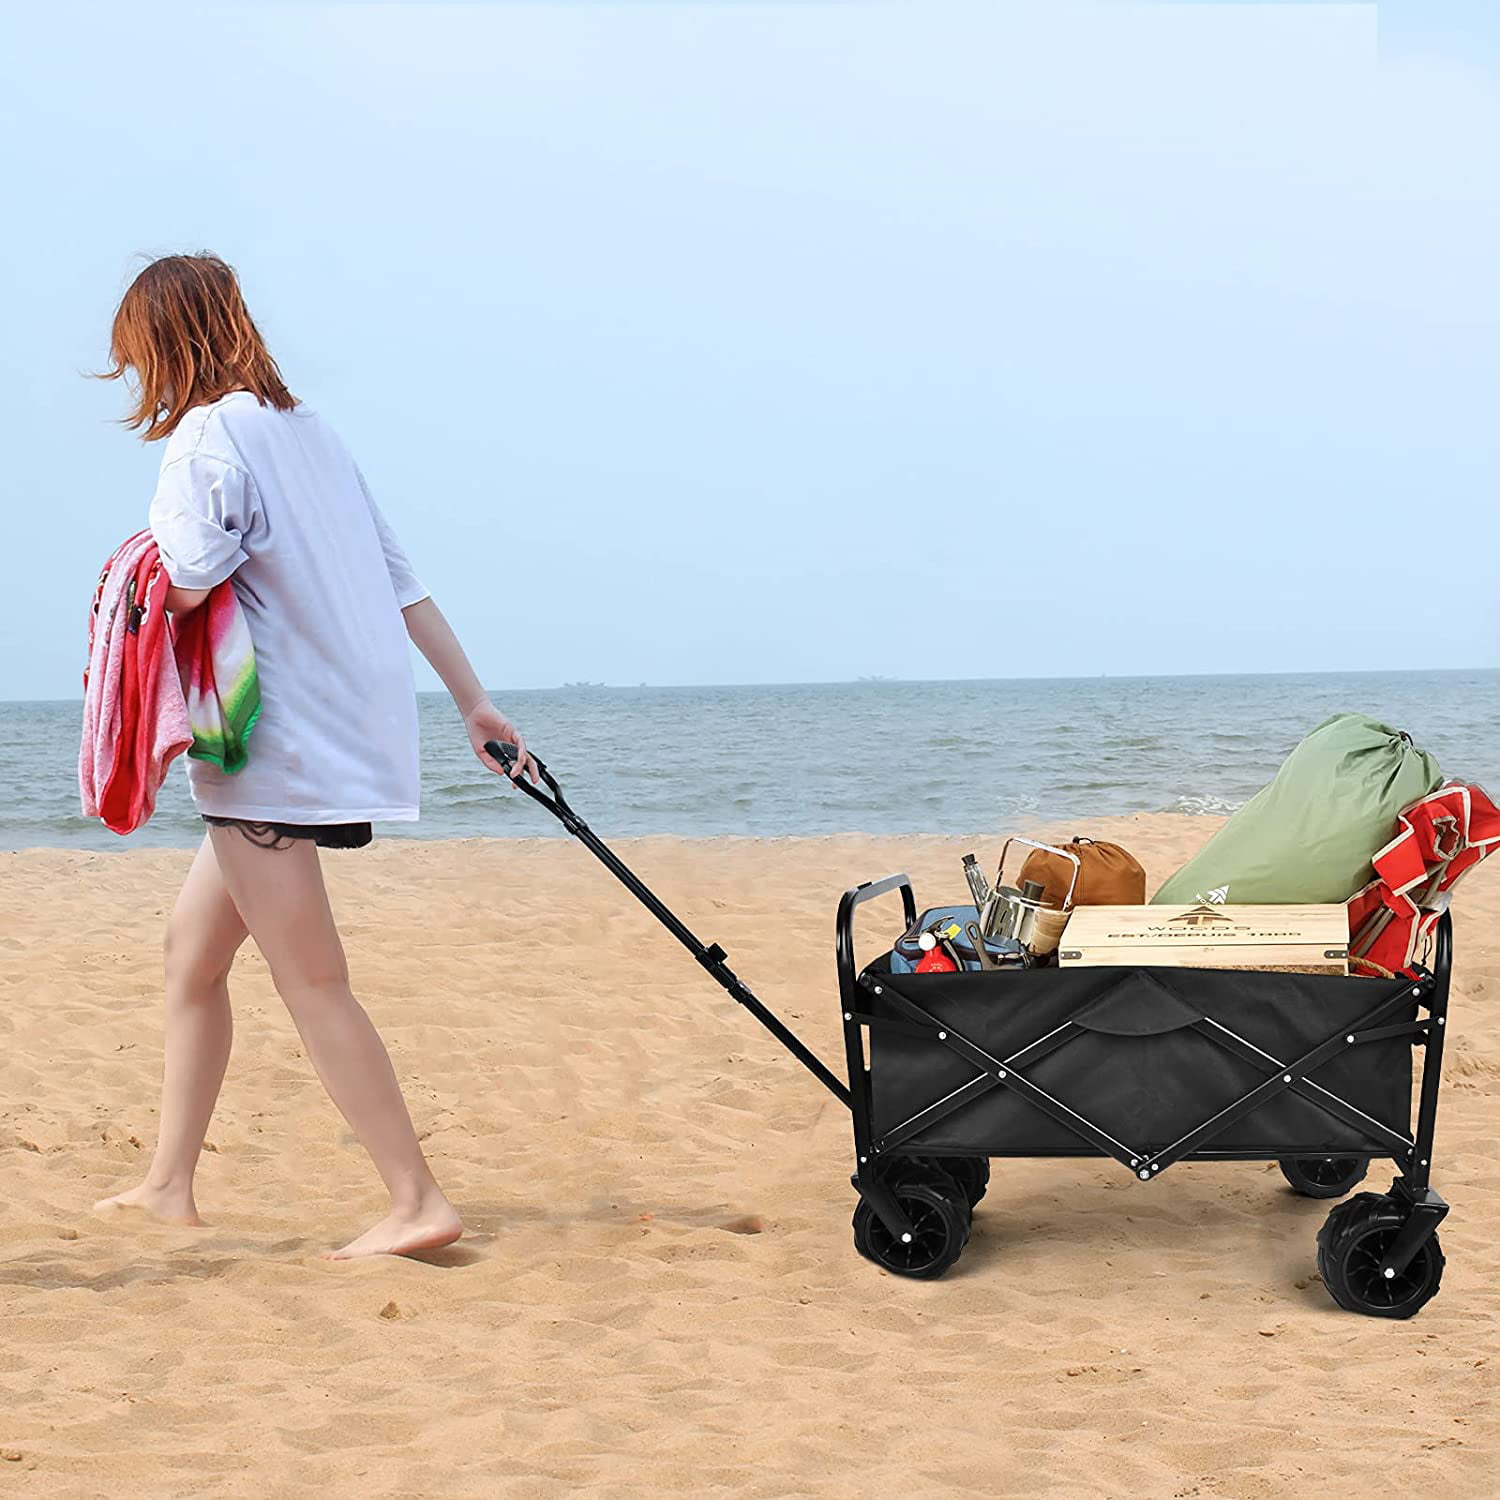 Park Collapsible Portable Utility Camping Grocery Canvas Wagon w/Carry Bag Red Adjustable Handle Prevent Sinking in Sand for Shopping … Heavy Duty Folding Wagon Cart w/7'' All-Terrain Wheel Beach 